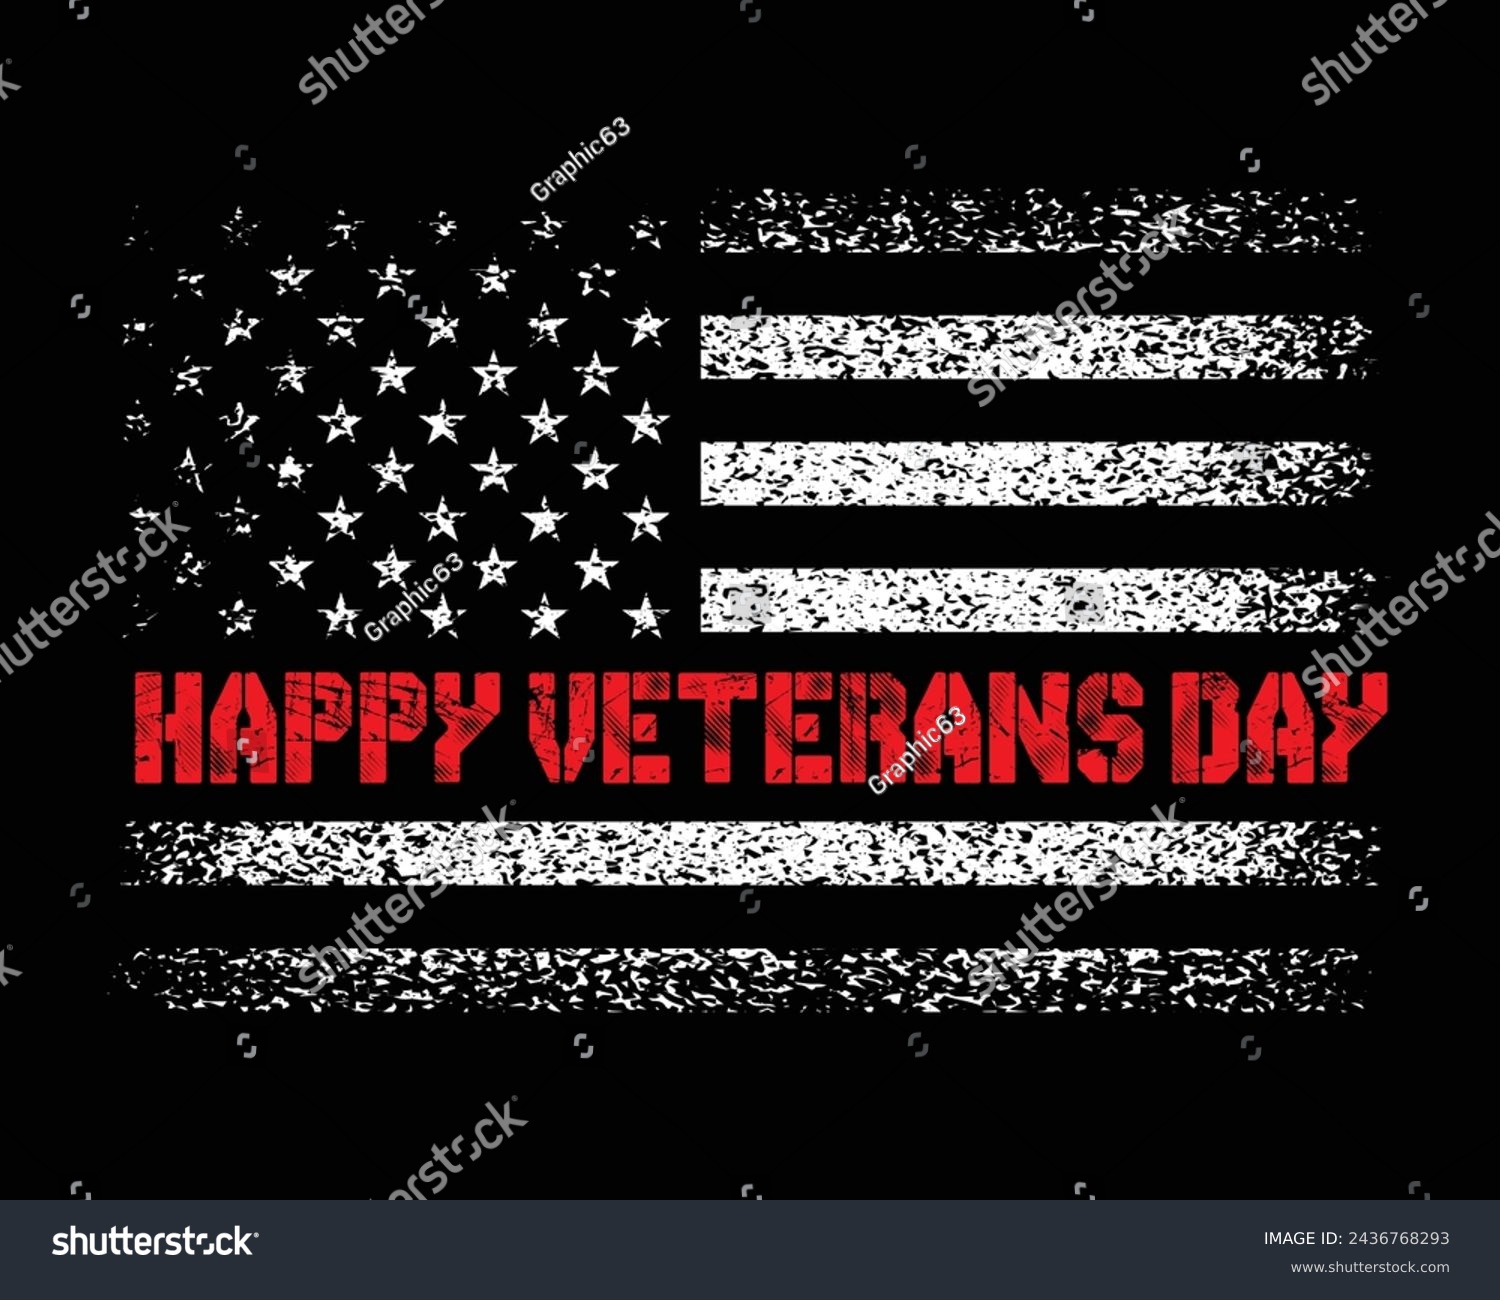 SVG of American Distressed Flag.Happy Veterans Day Motivational Typography Quotes Design Vector t shirt,poster,banner,backround svg